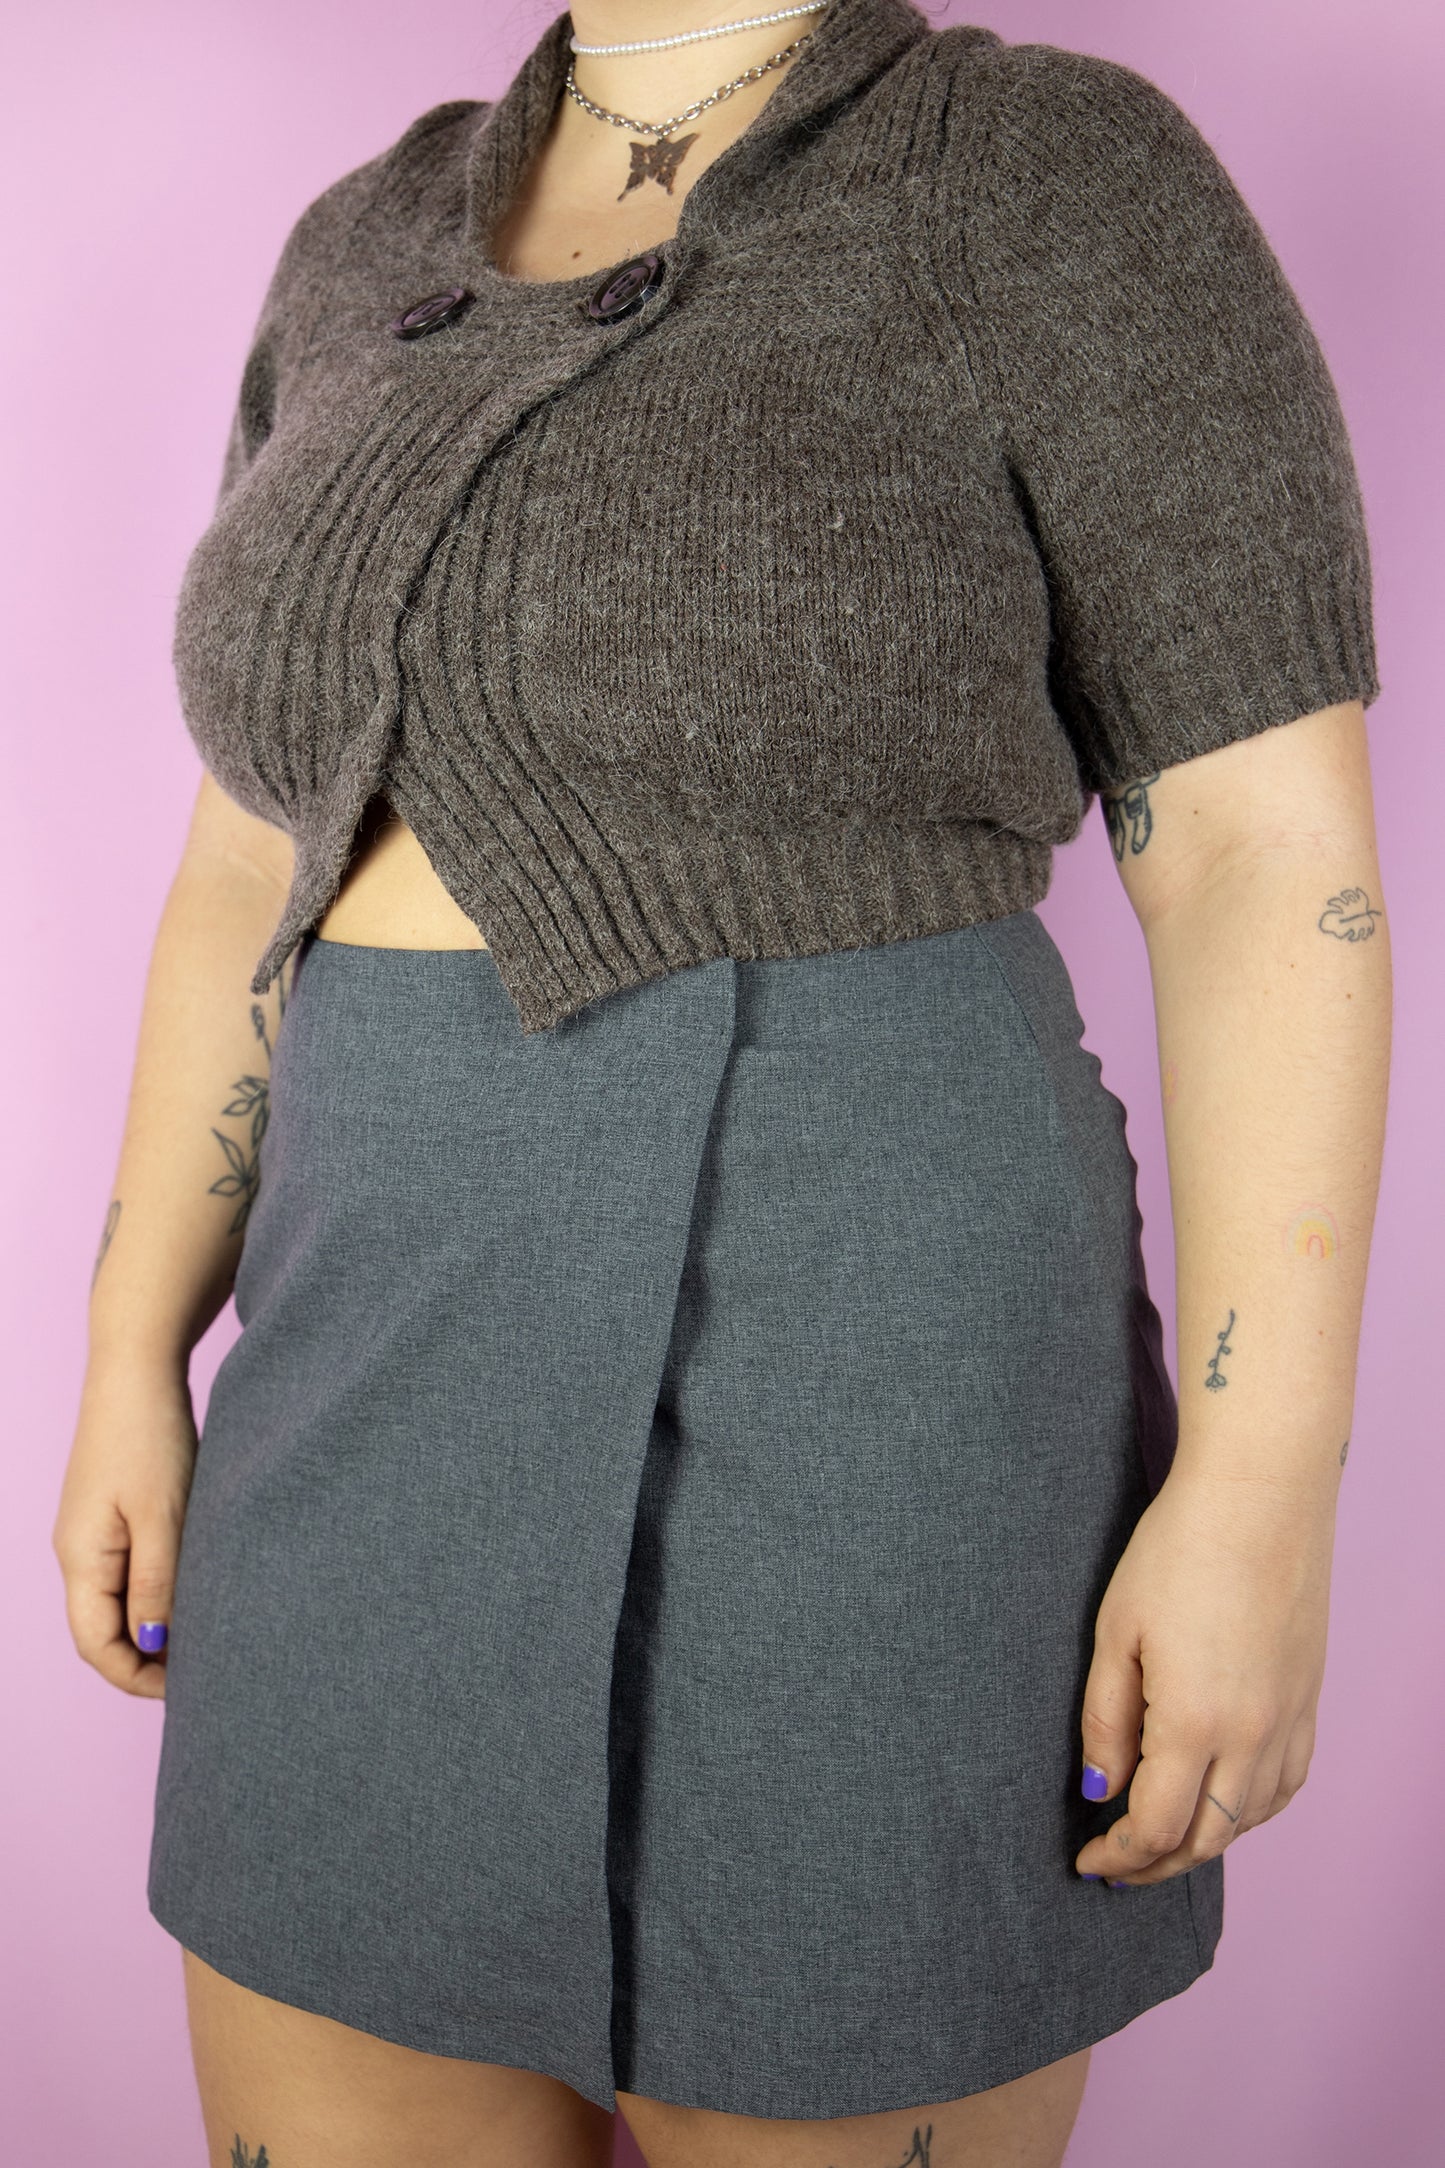 The Y2K Gray Wrap Mini Skirt is a vintage skirt secured with velcro and buttons. Cyber preppy 2000s subversive mini skirt.